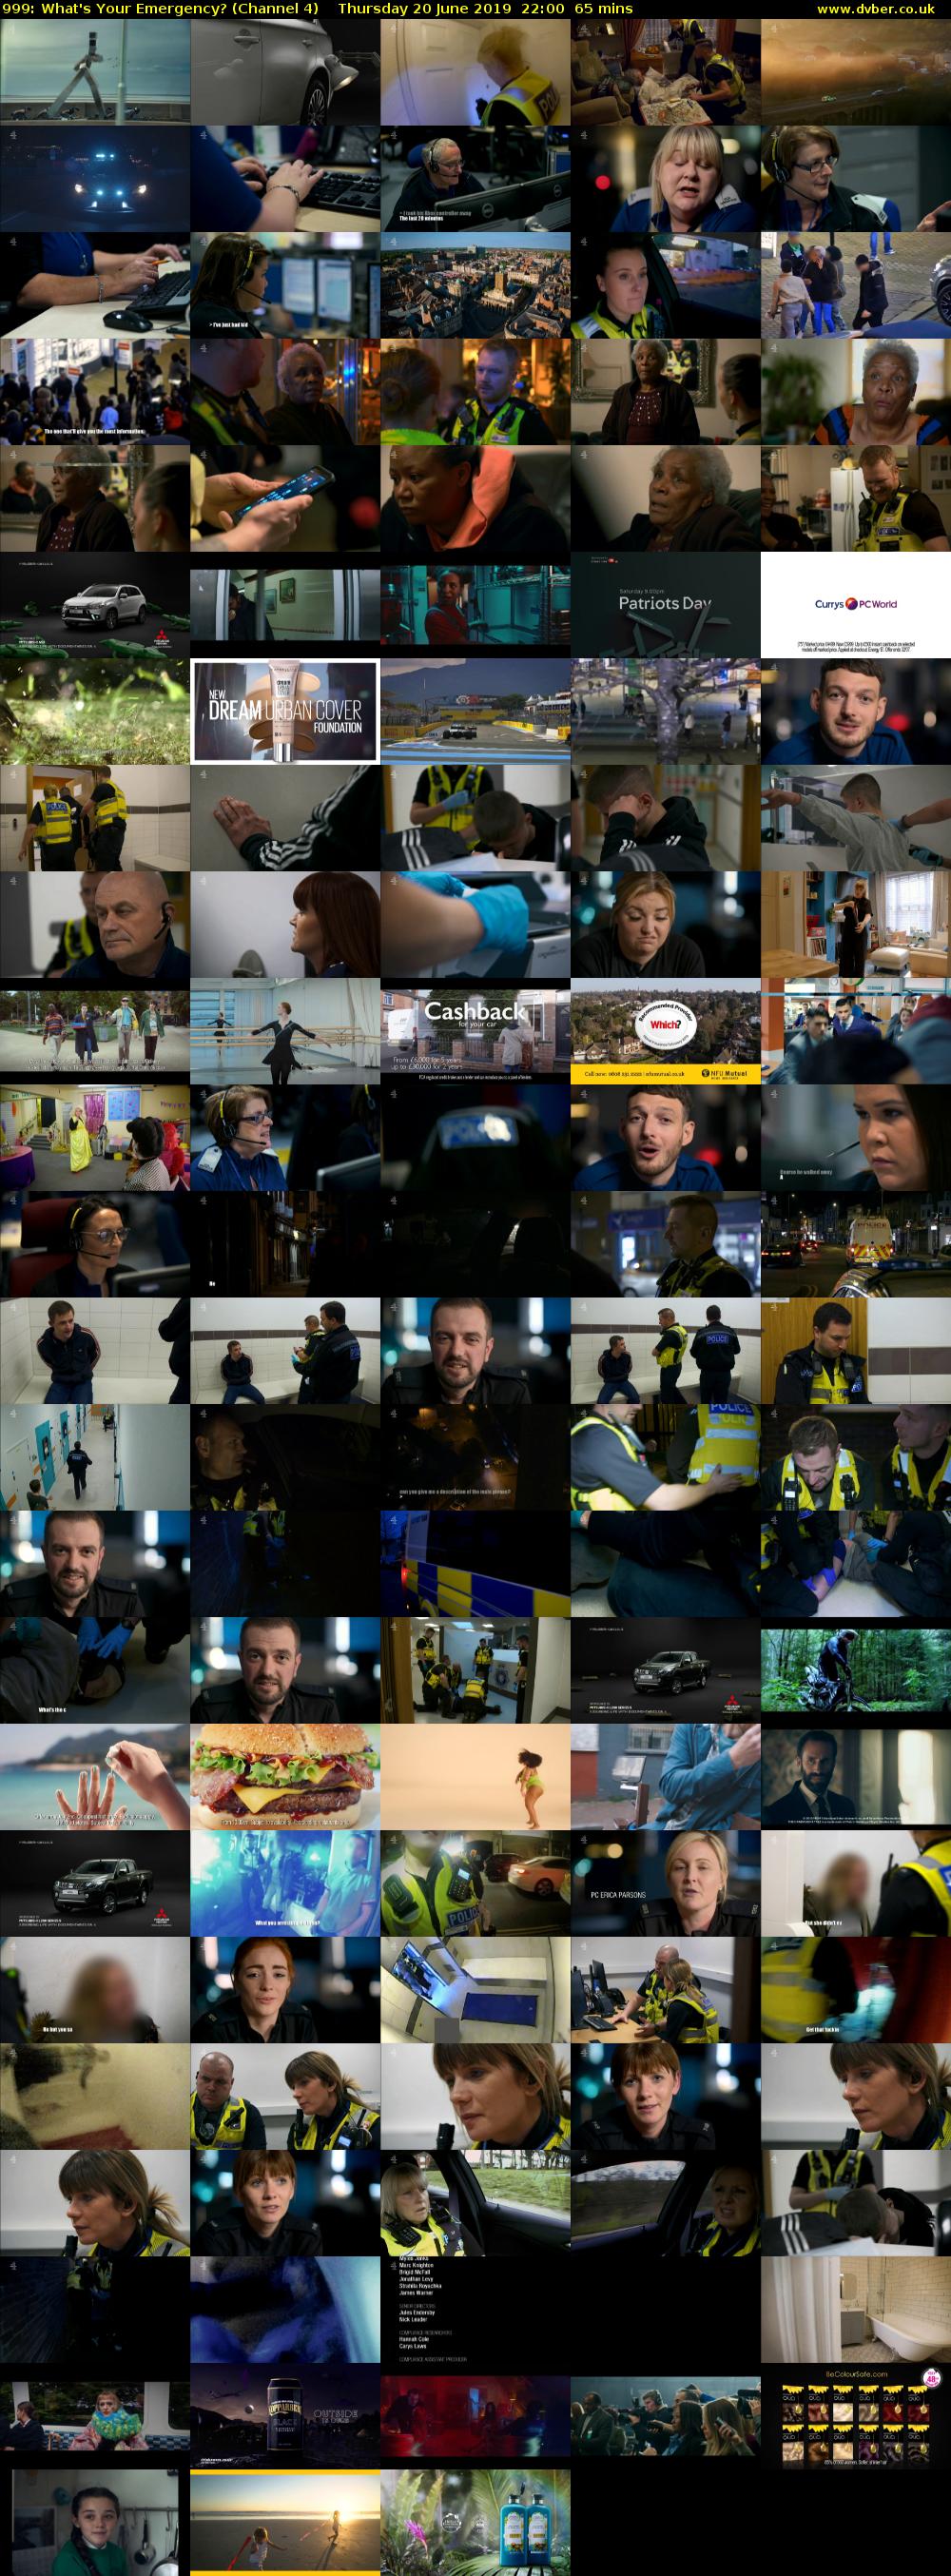 999: What's Your Emergency? (Channel 4) Thursday 20 June 2019 22:00 - 23:05